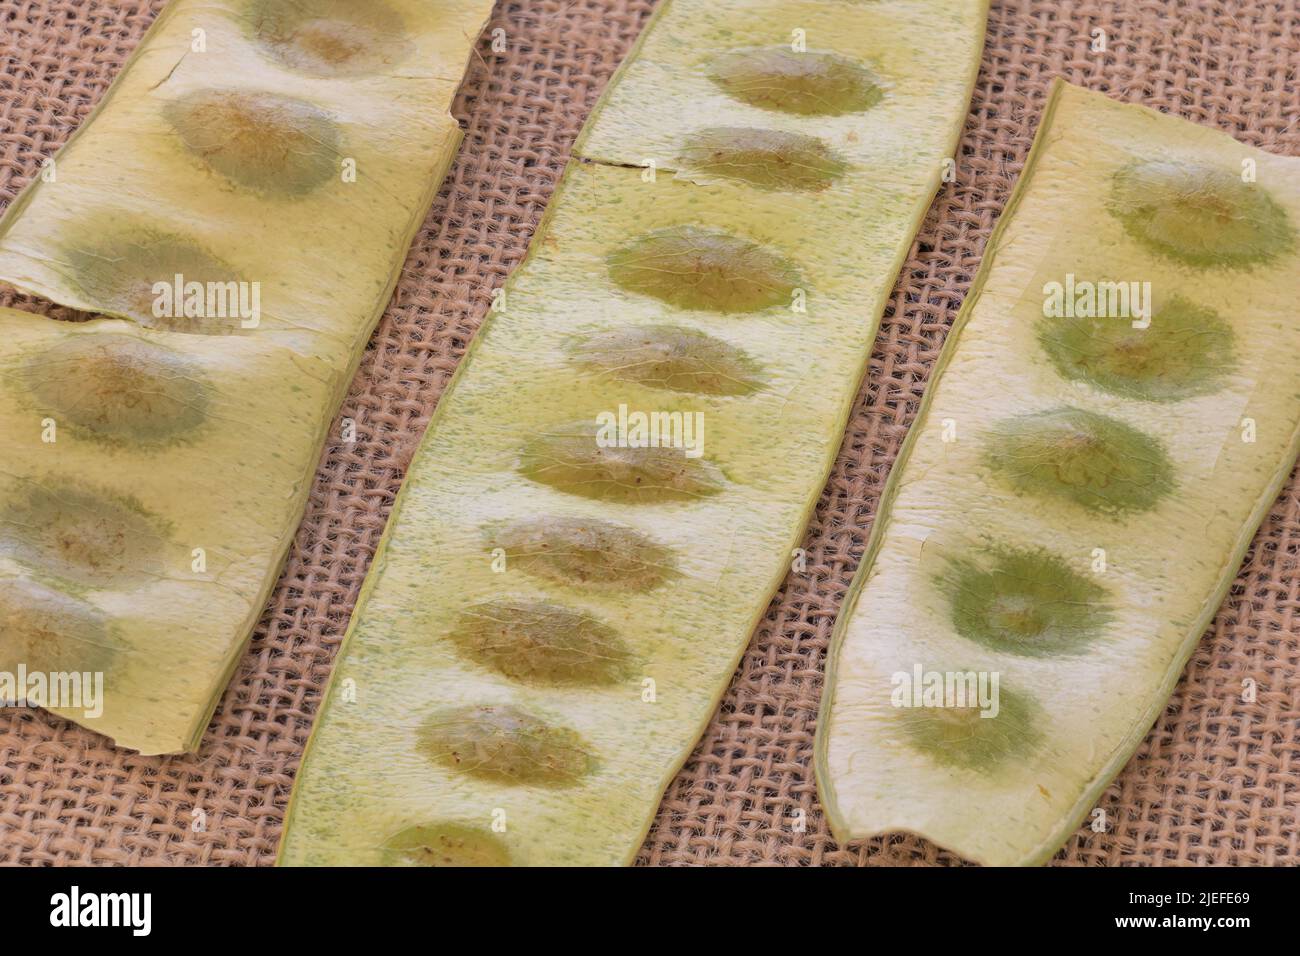 Close up shot of seed pods of a Albizia lebbeck on a rustic fabric background. Stock Photo